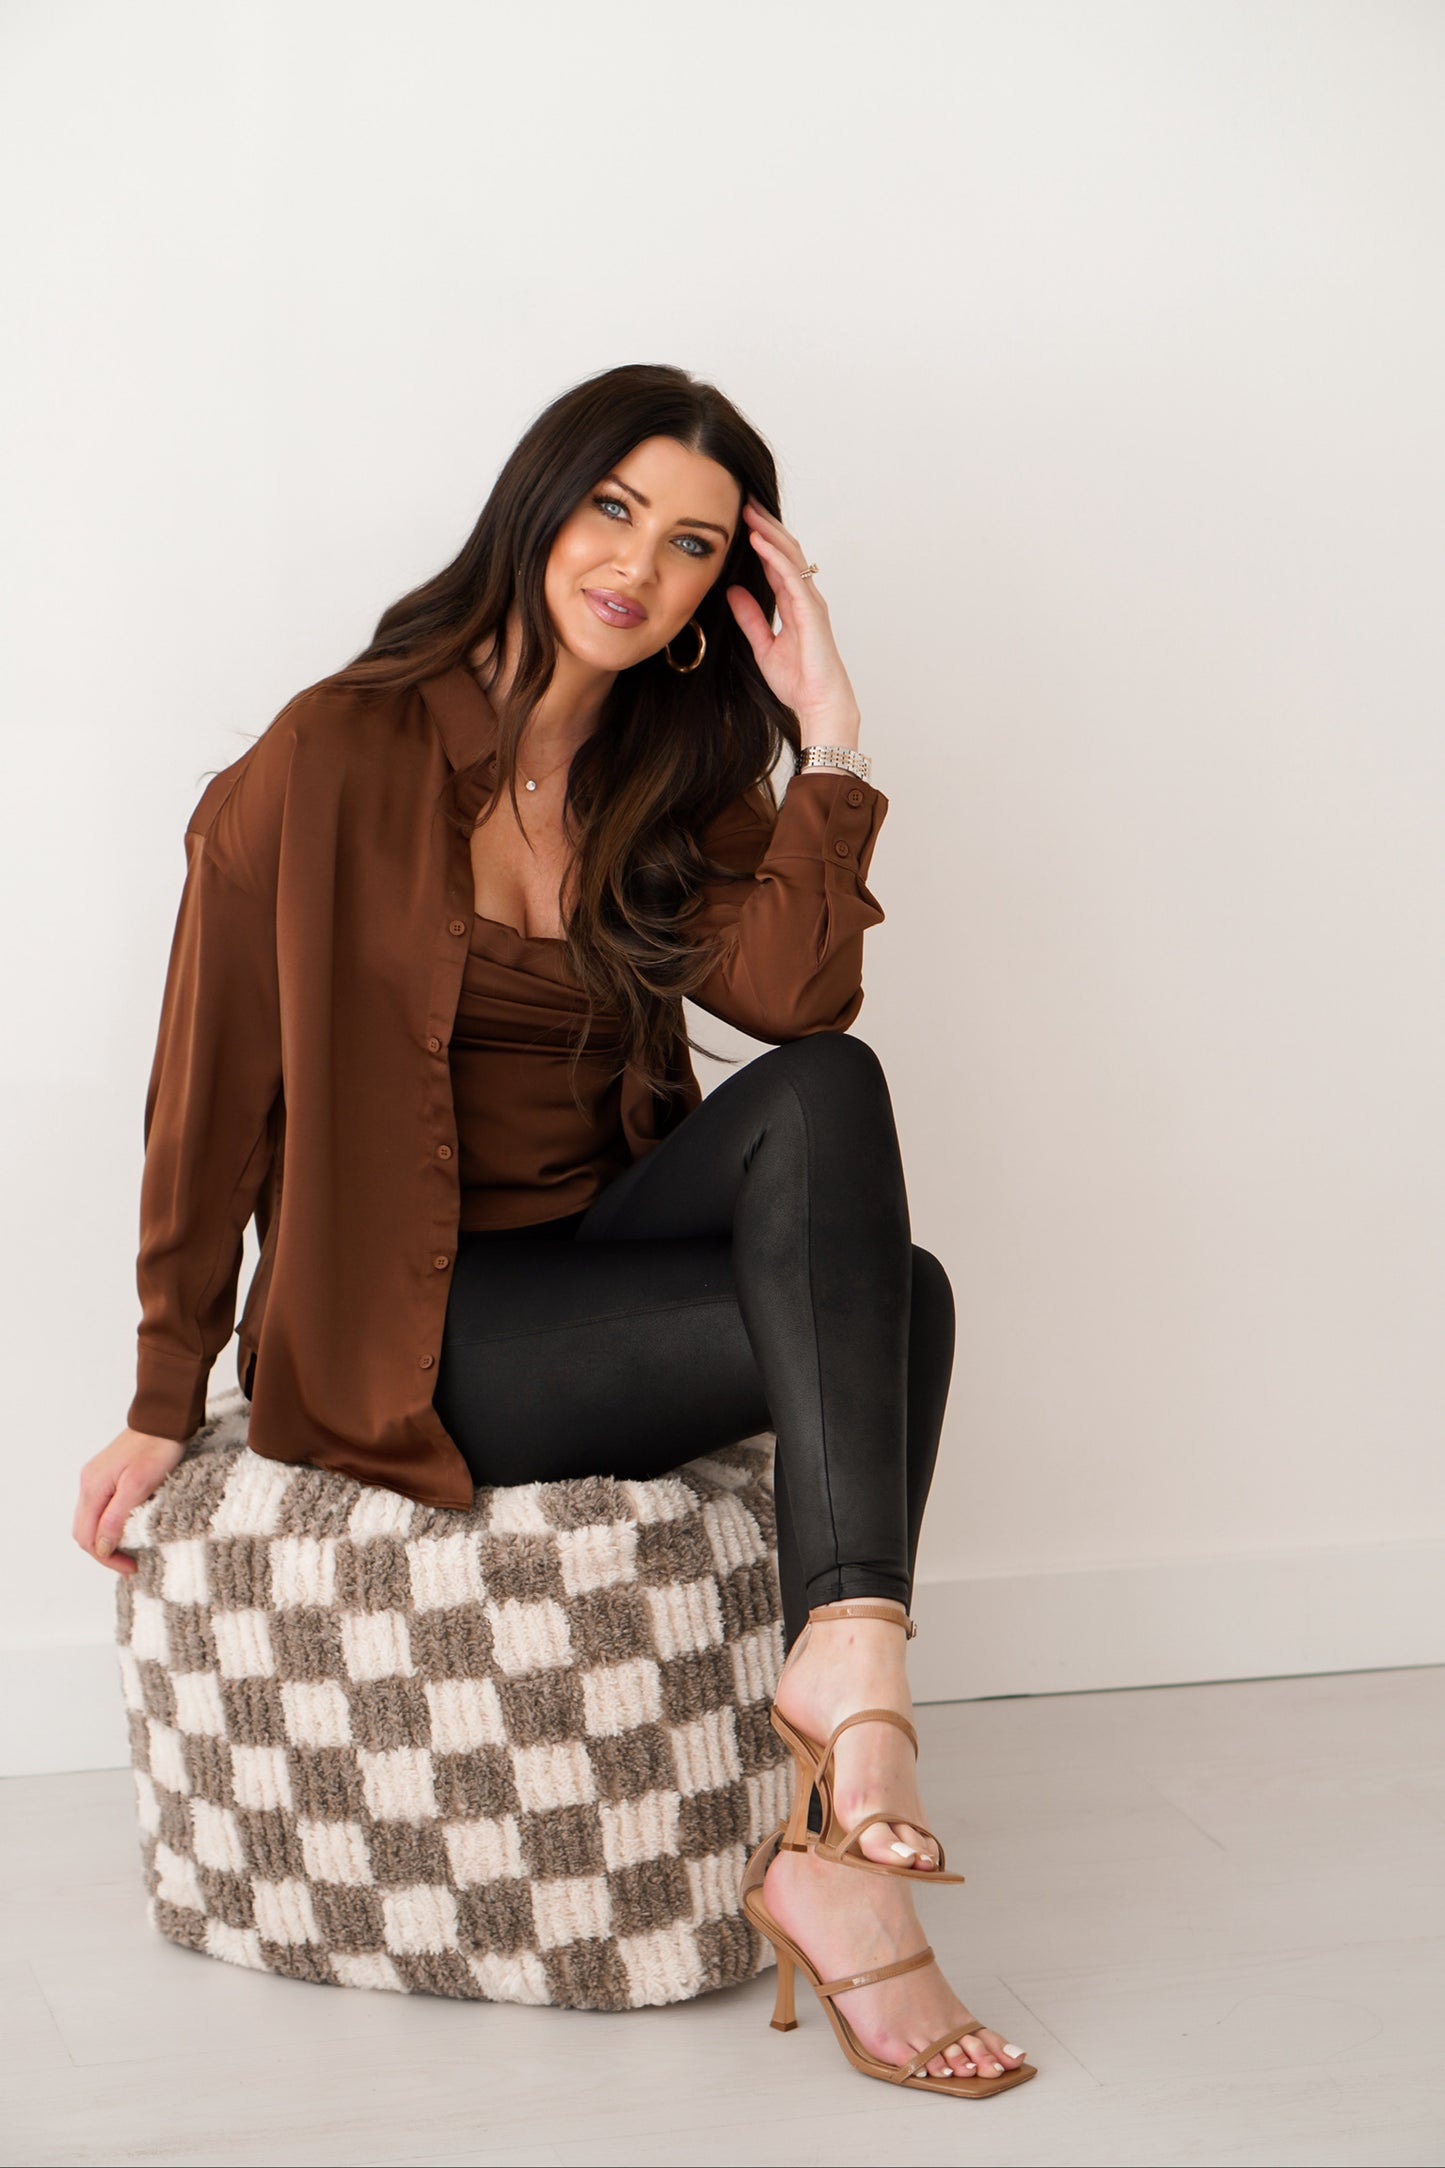 Brunette girl sitting on checkered ottoman wearing chocolate brown silk top set in front of white wall. Her legs are crossed and hand on head. 